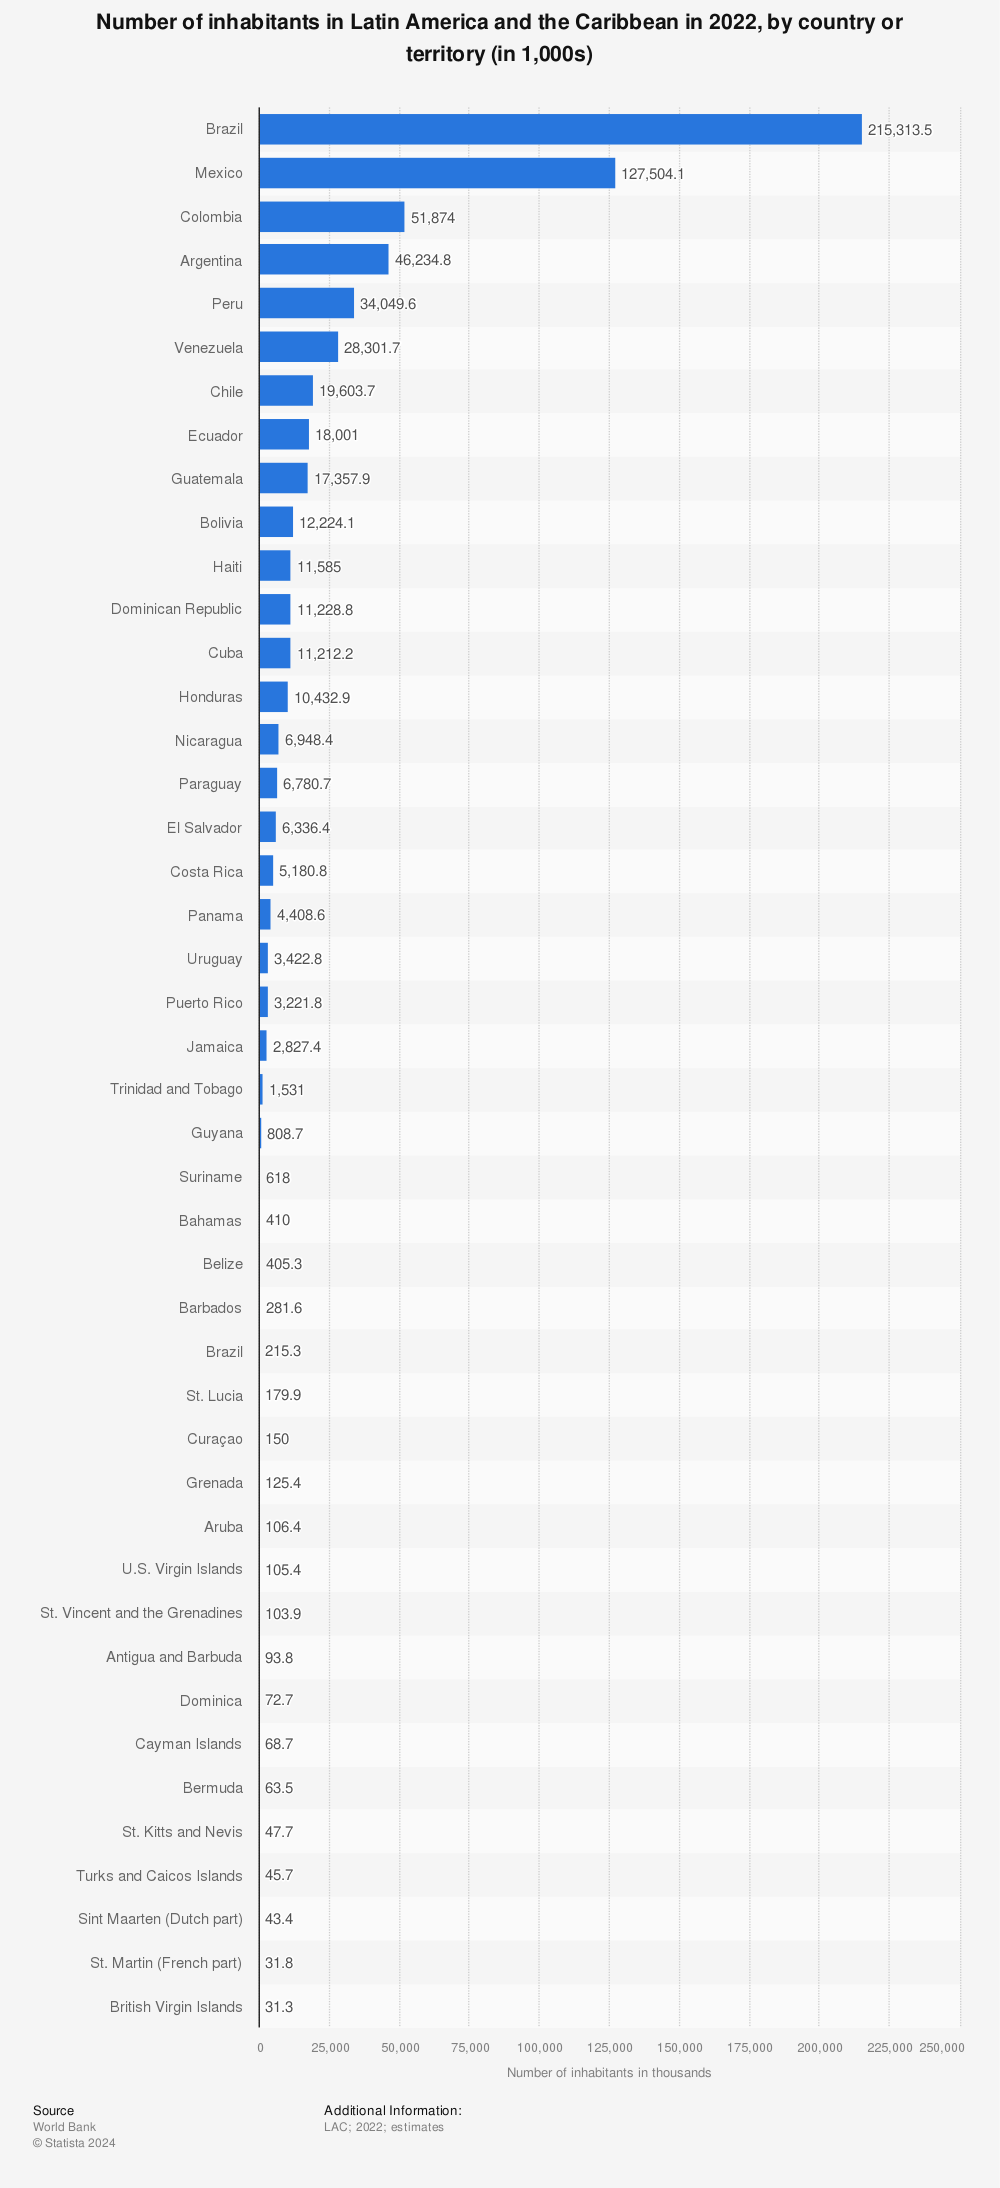 Statistic: Number of inhabitants in Latin America and the Caribbean in 2021, by country or territory (in millions) | Statista